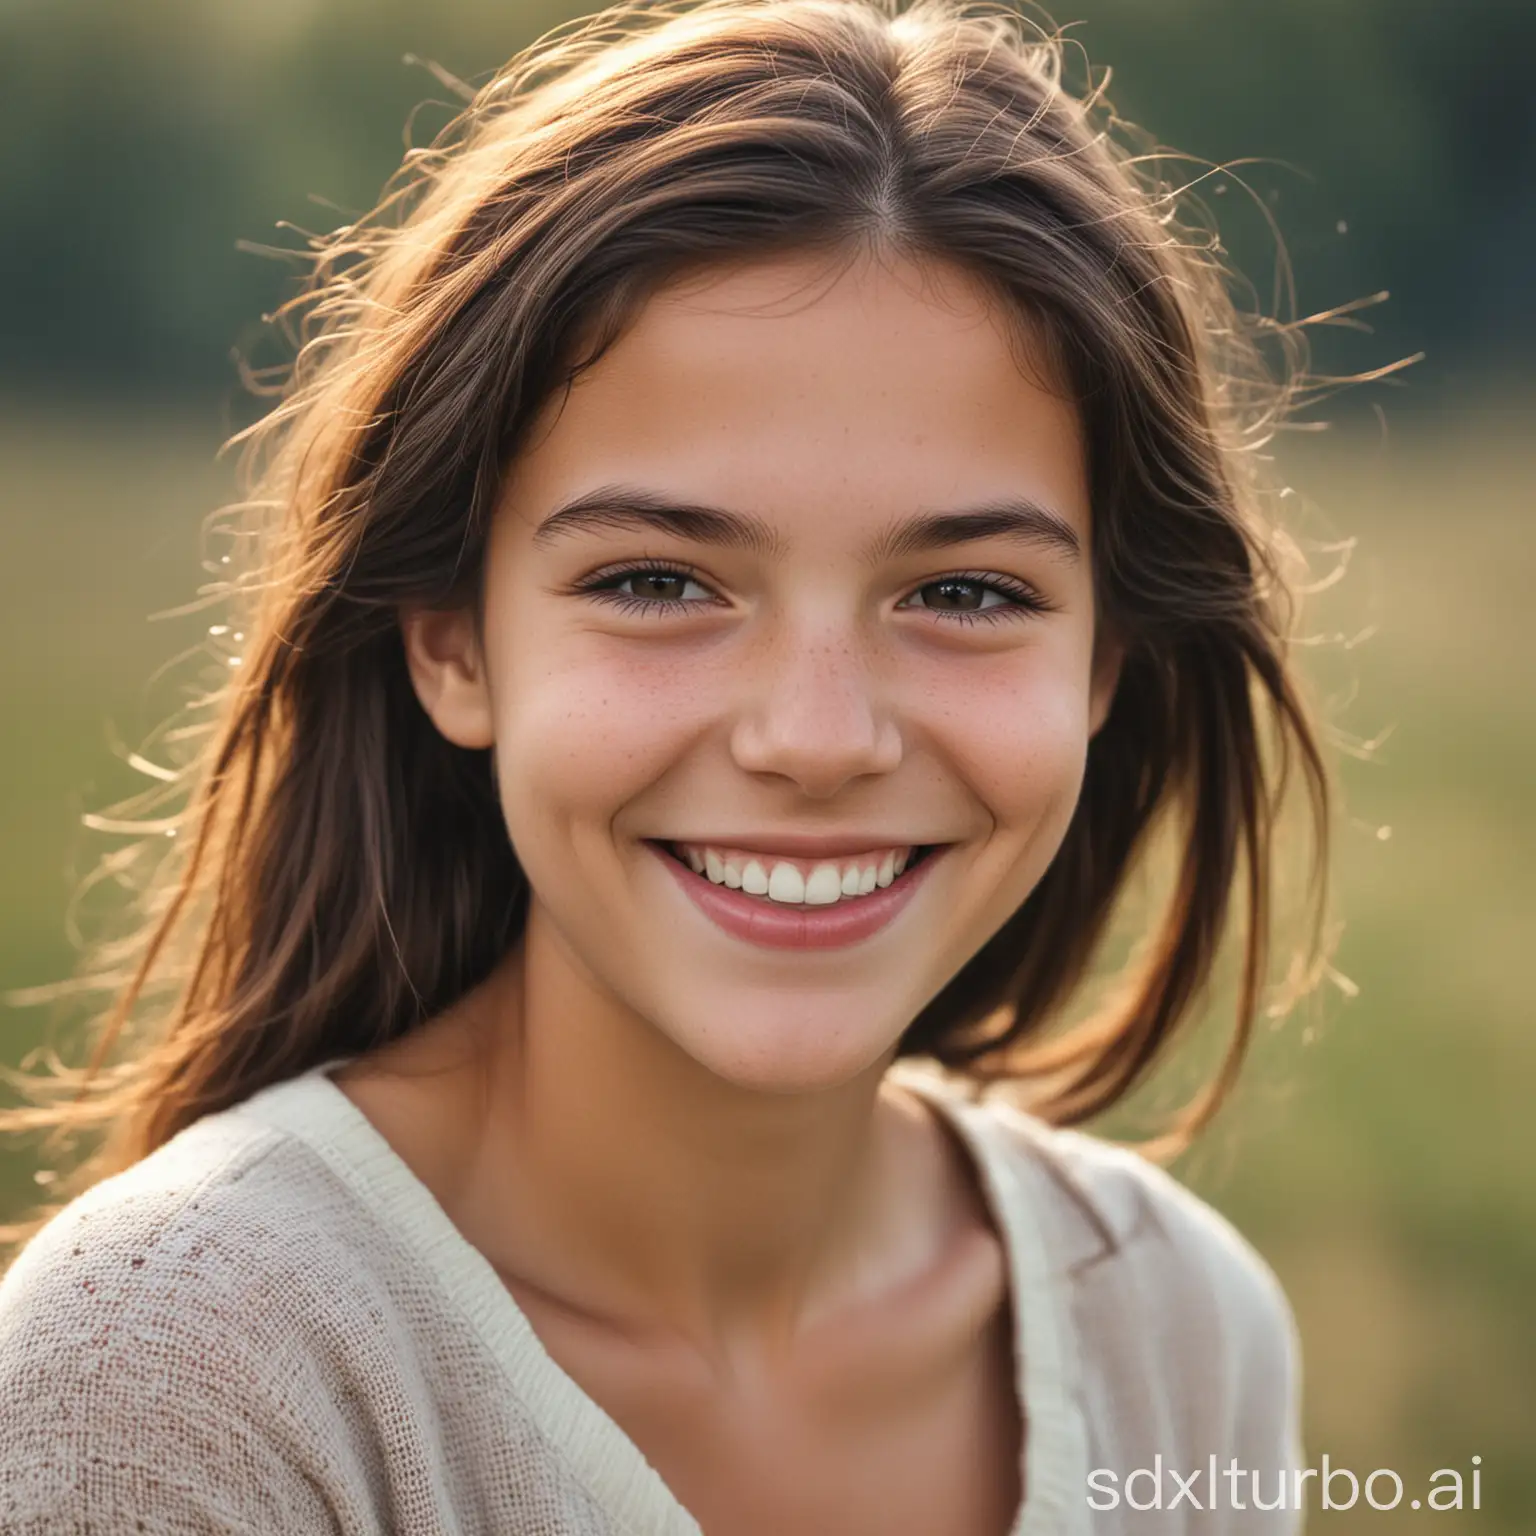 Portrait-of-a-Smiling-Girl